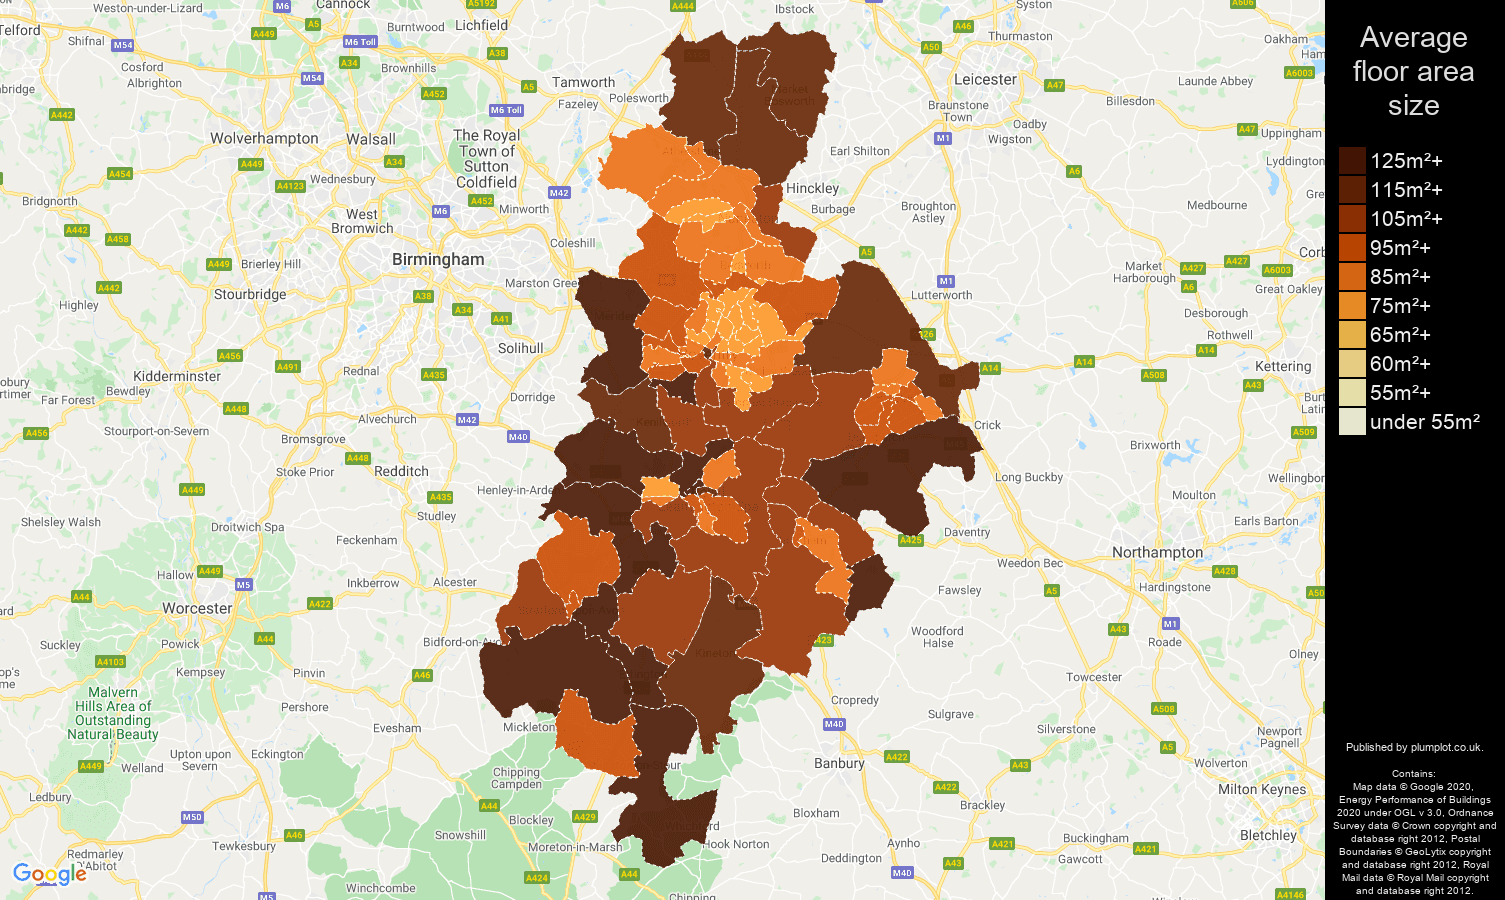 Coventry map of average floor area size of houses